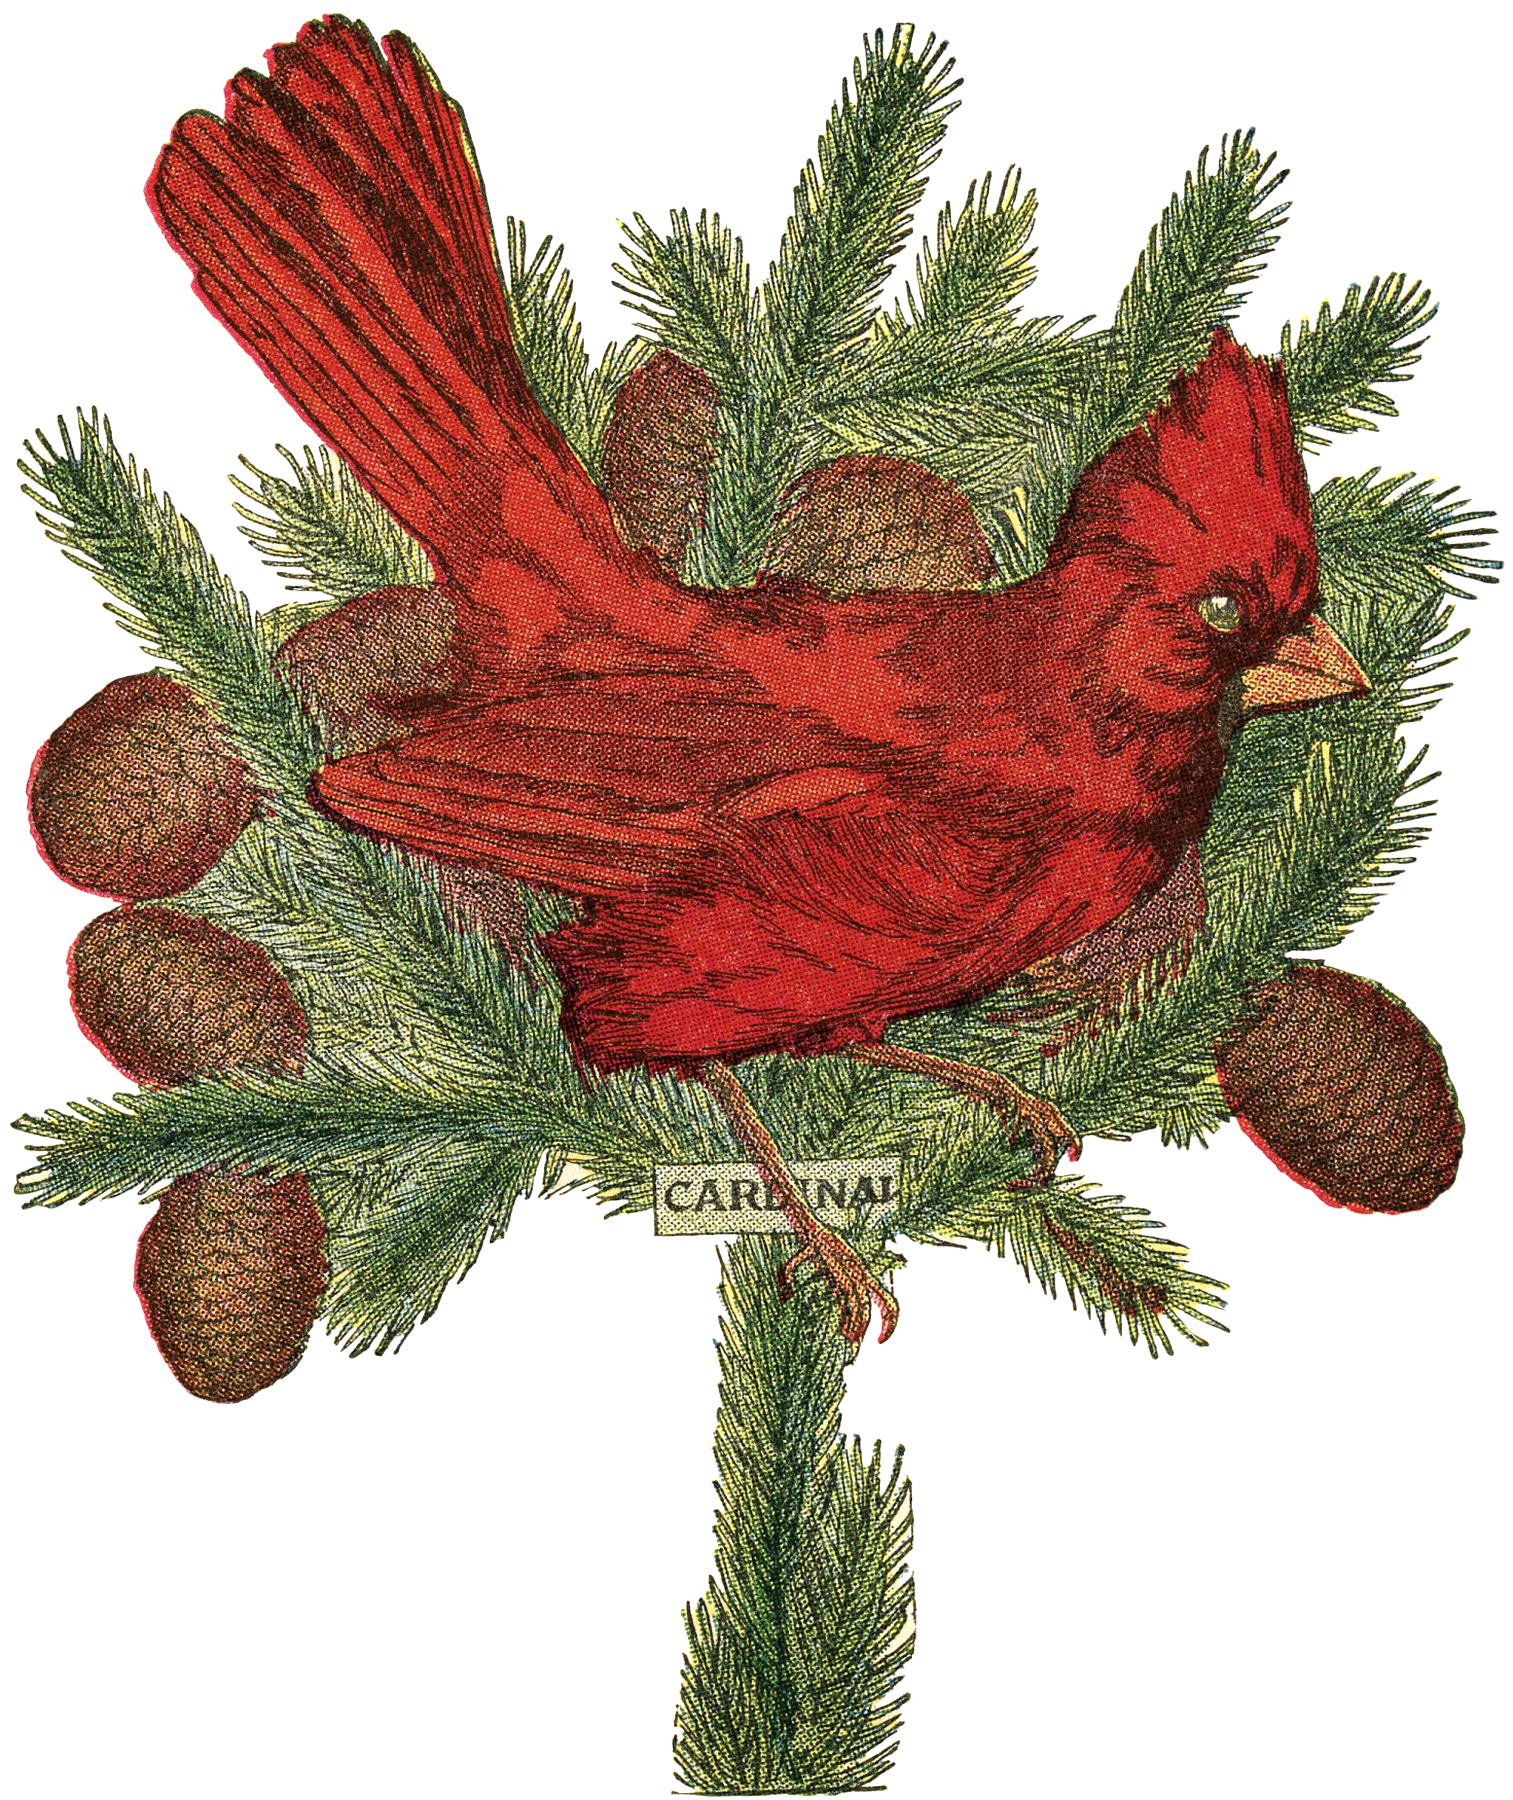 Holiday Cardinal Image! - The Graphics Fairy